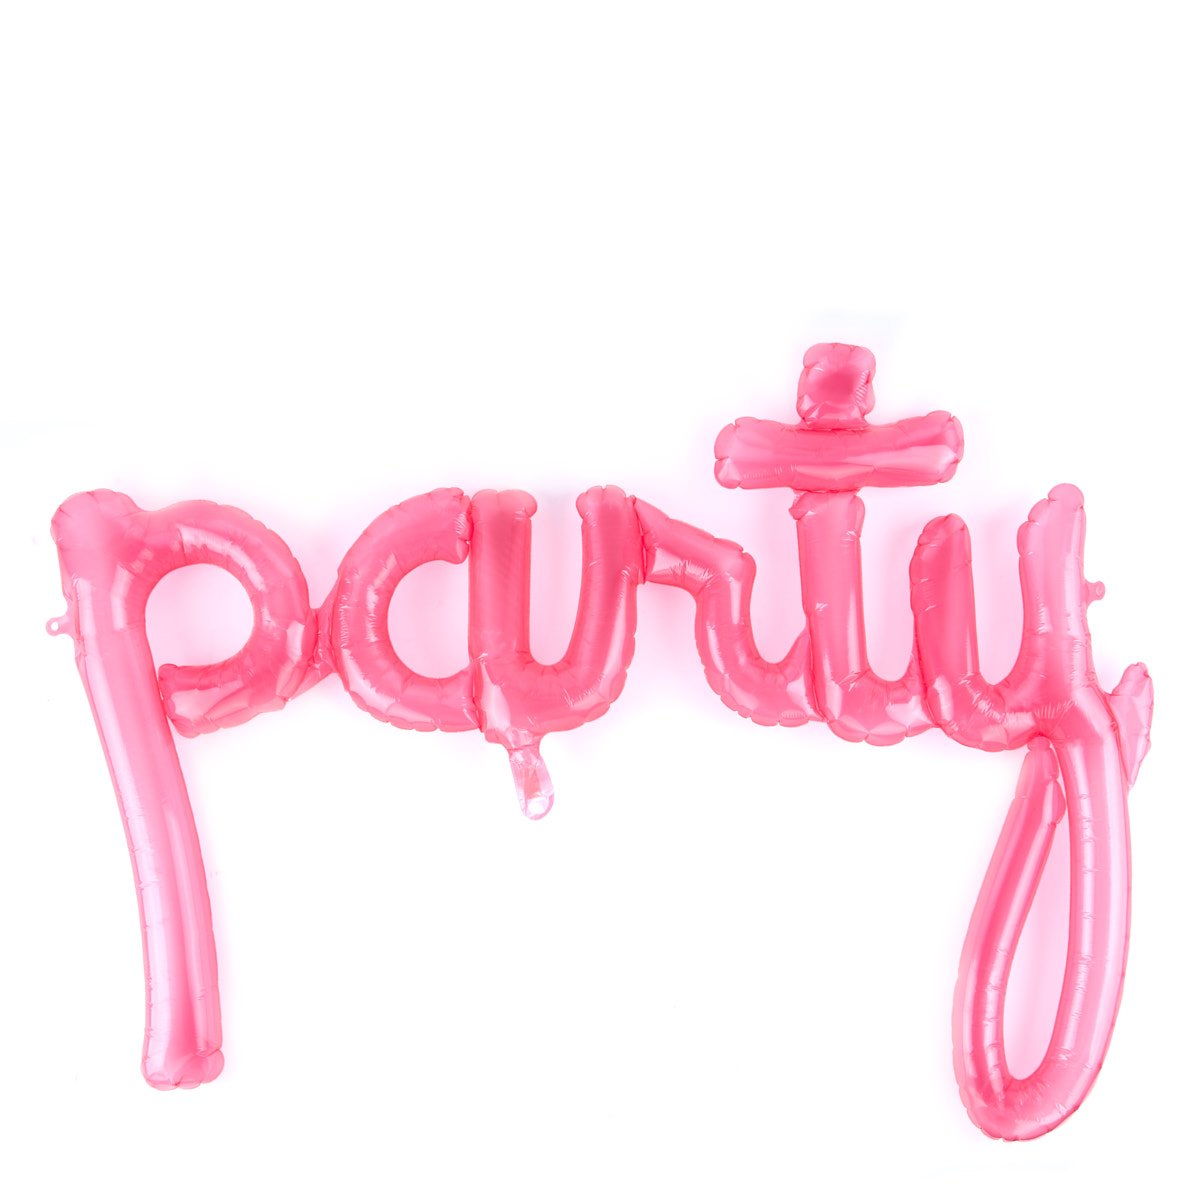 34-Inch Pink Translucent Script Balloon - Party